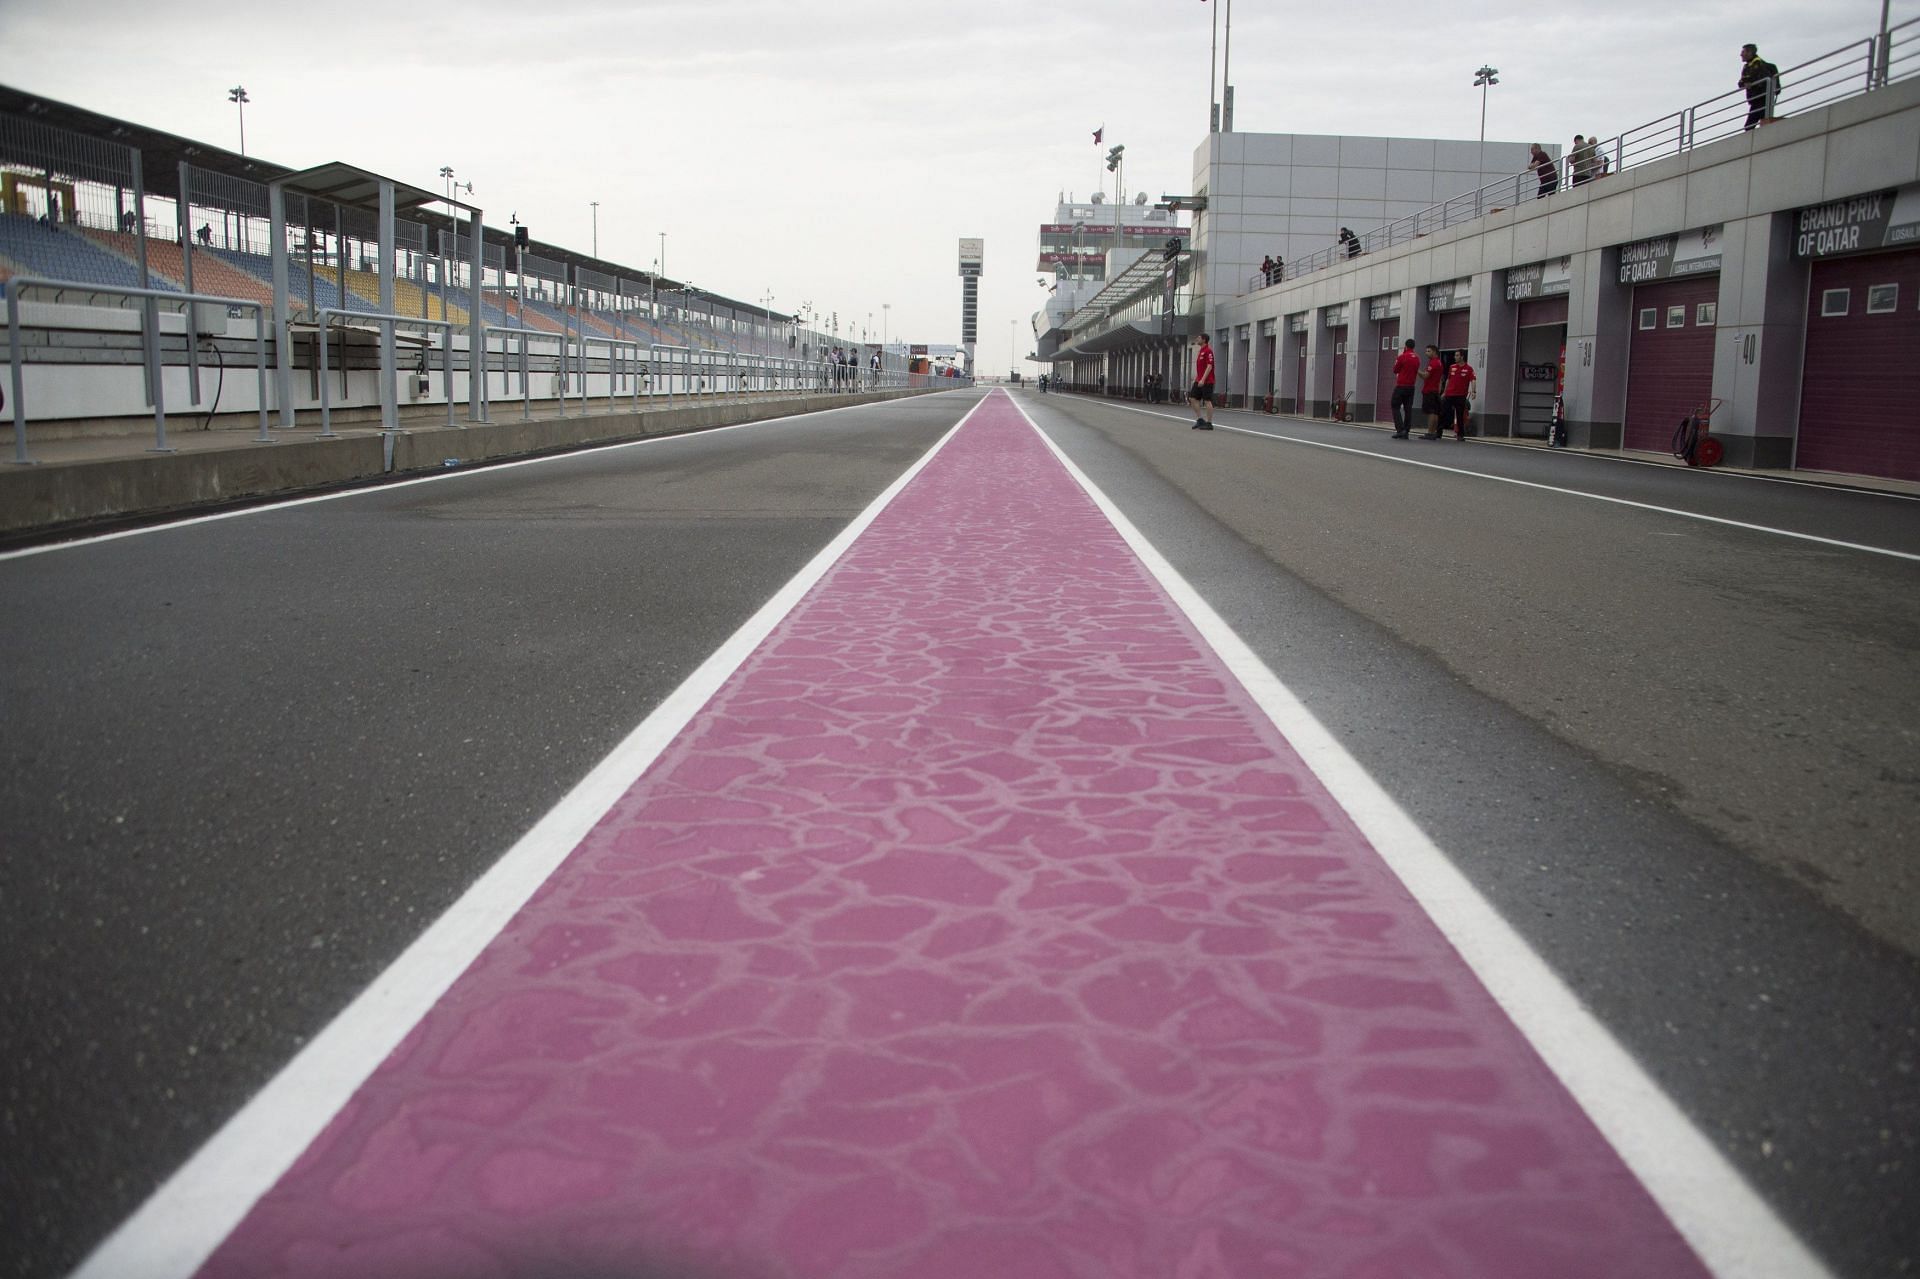 The Losail Intenational Circuit pitlane will be modified for the Qatar GP. (Photo by Mirco Lazzari gp/Getty Images)